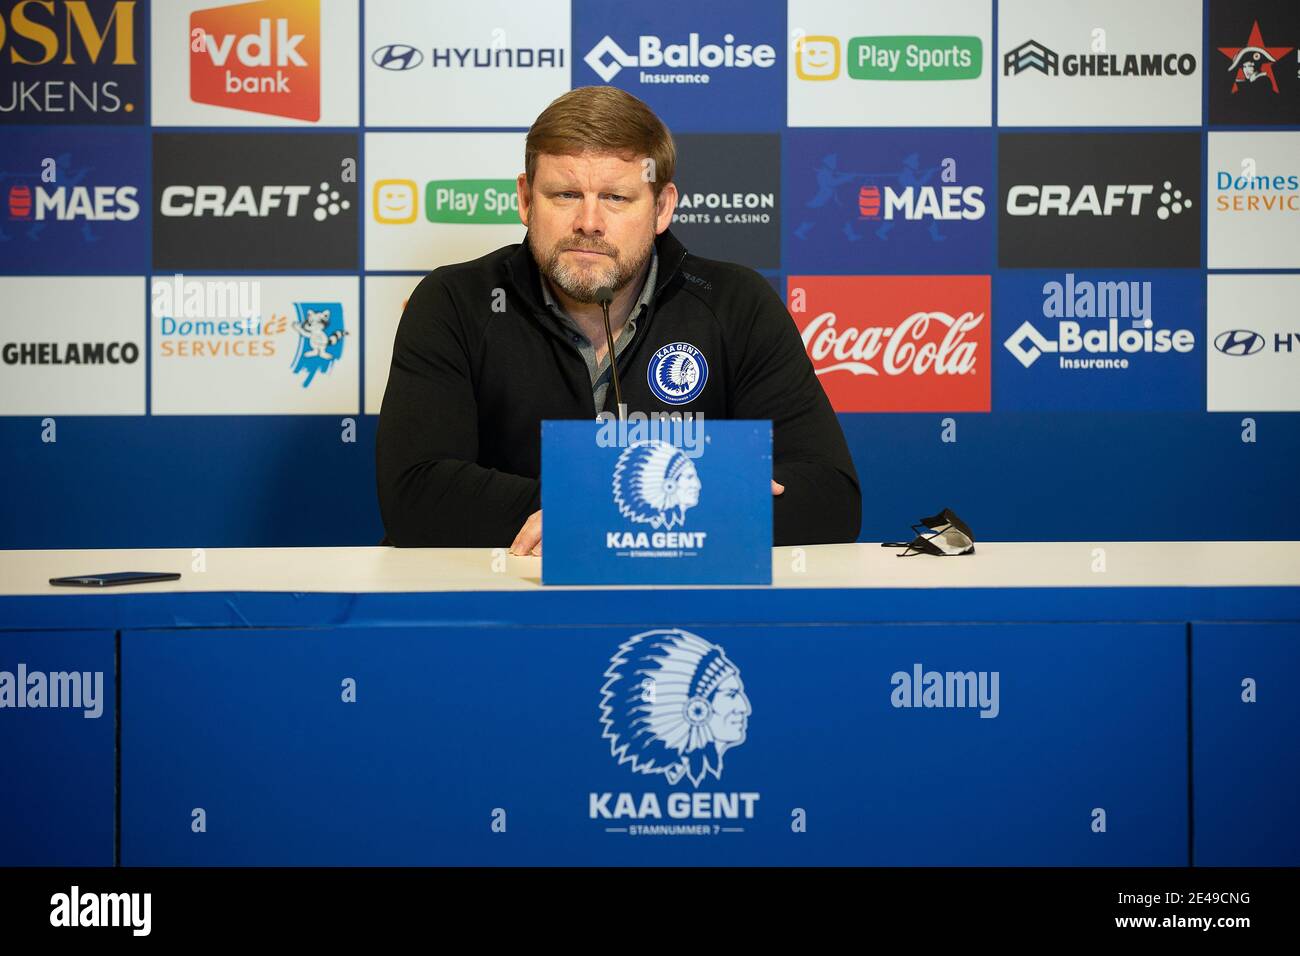 Gent S New Head Coach Hein Vanhaezebrouck Pictured During A Press Conference Of Belgian Soccer Team Kaa Gent Friday 22 January 21 In Gent Ahead Of Stock Photo Alamy